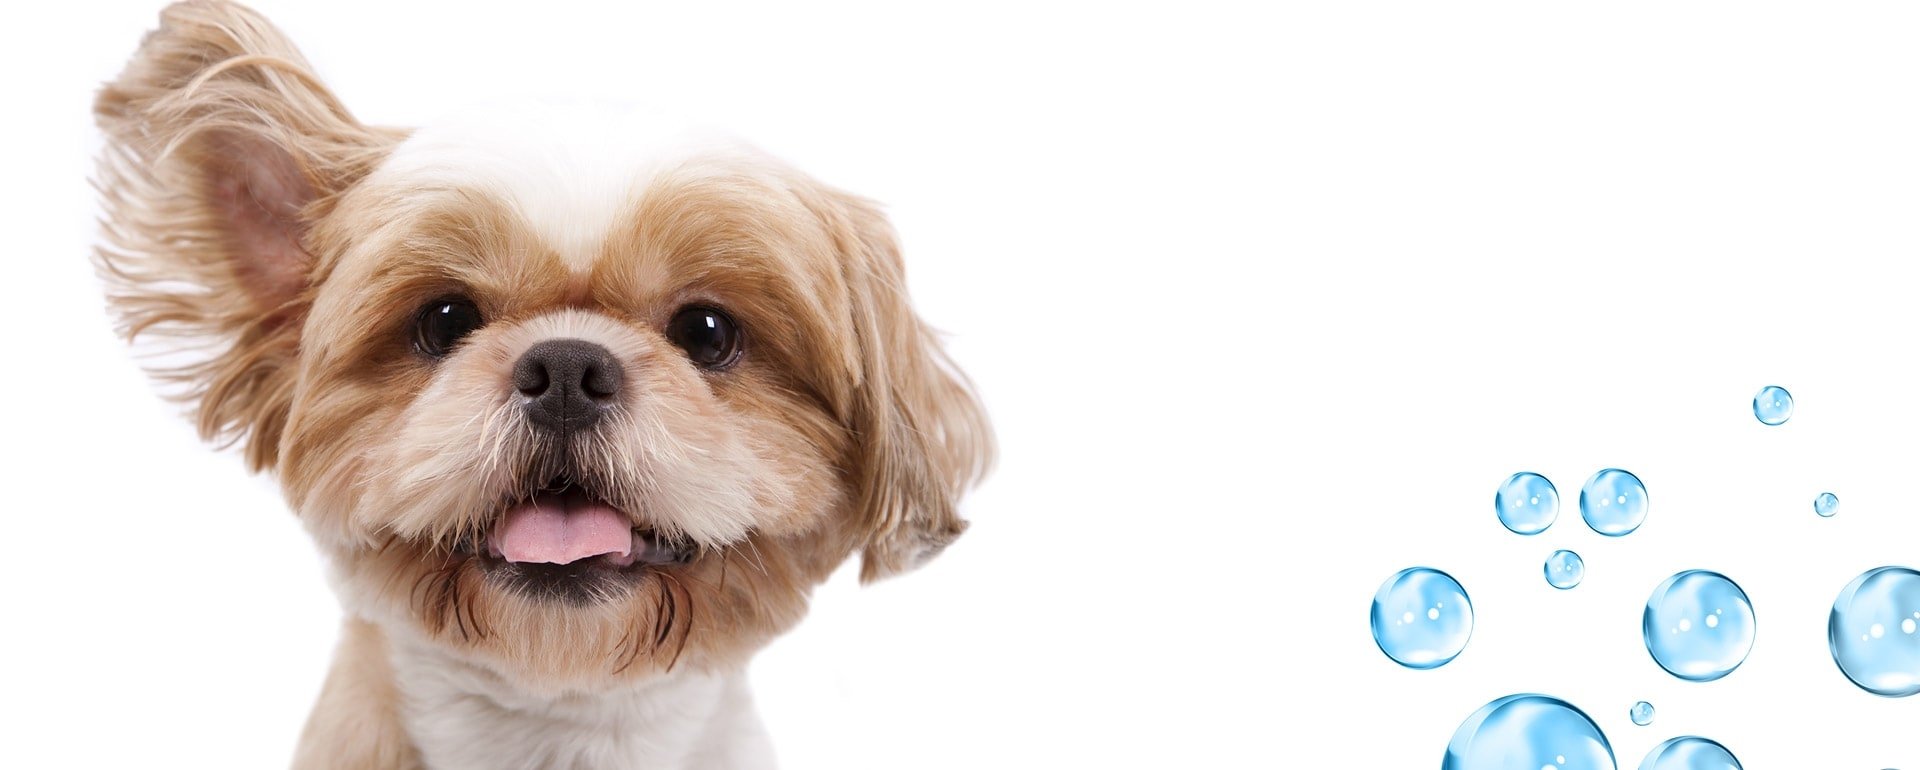 Get adopted with perfect dog grooming